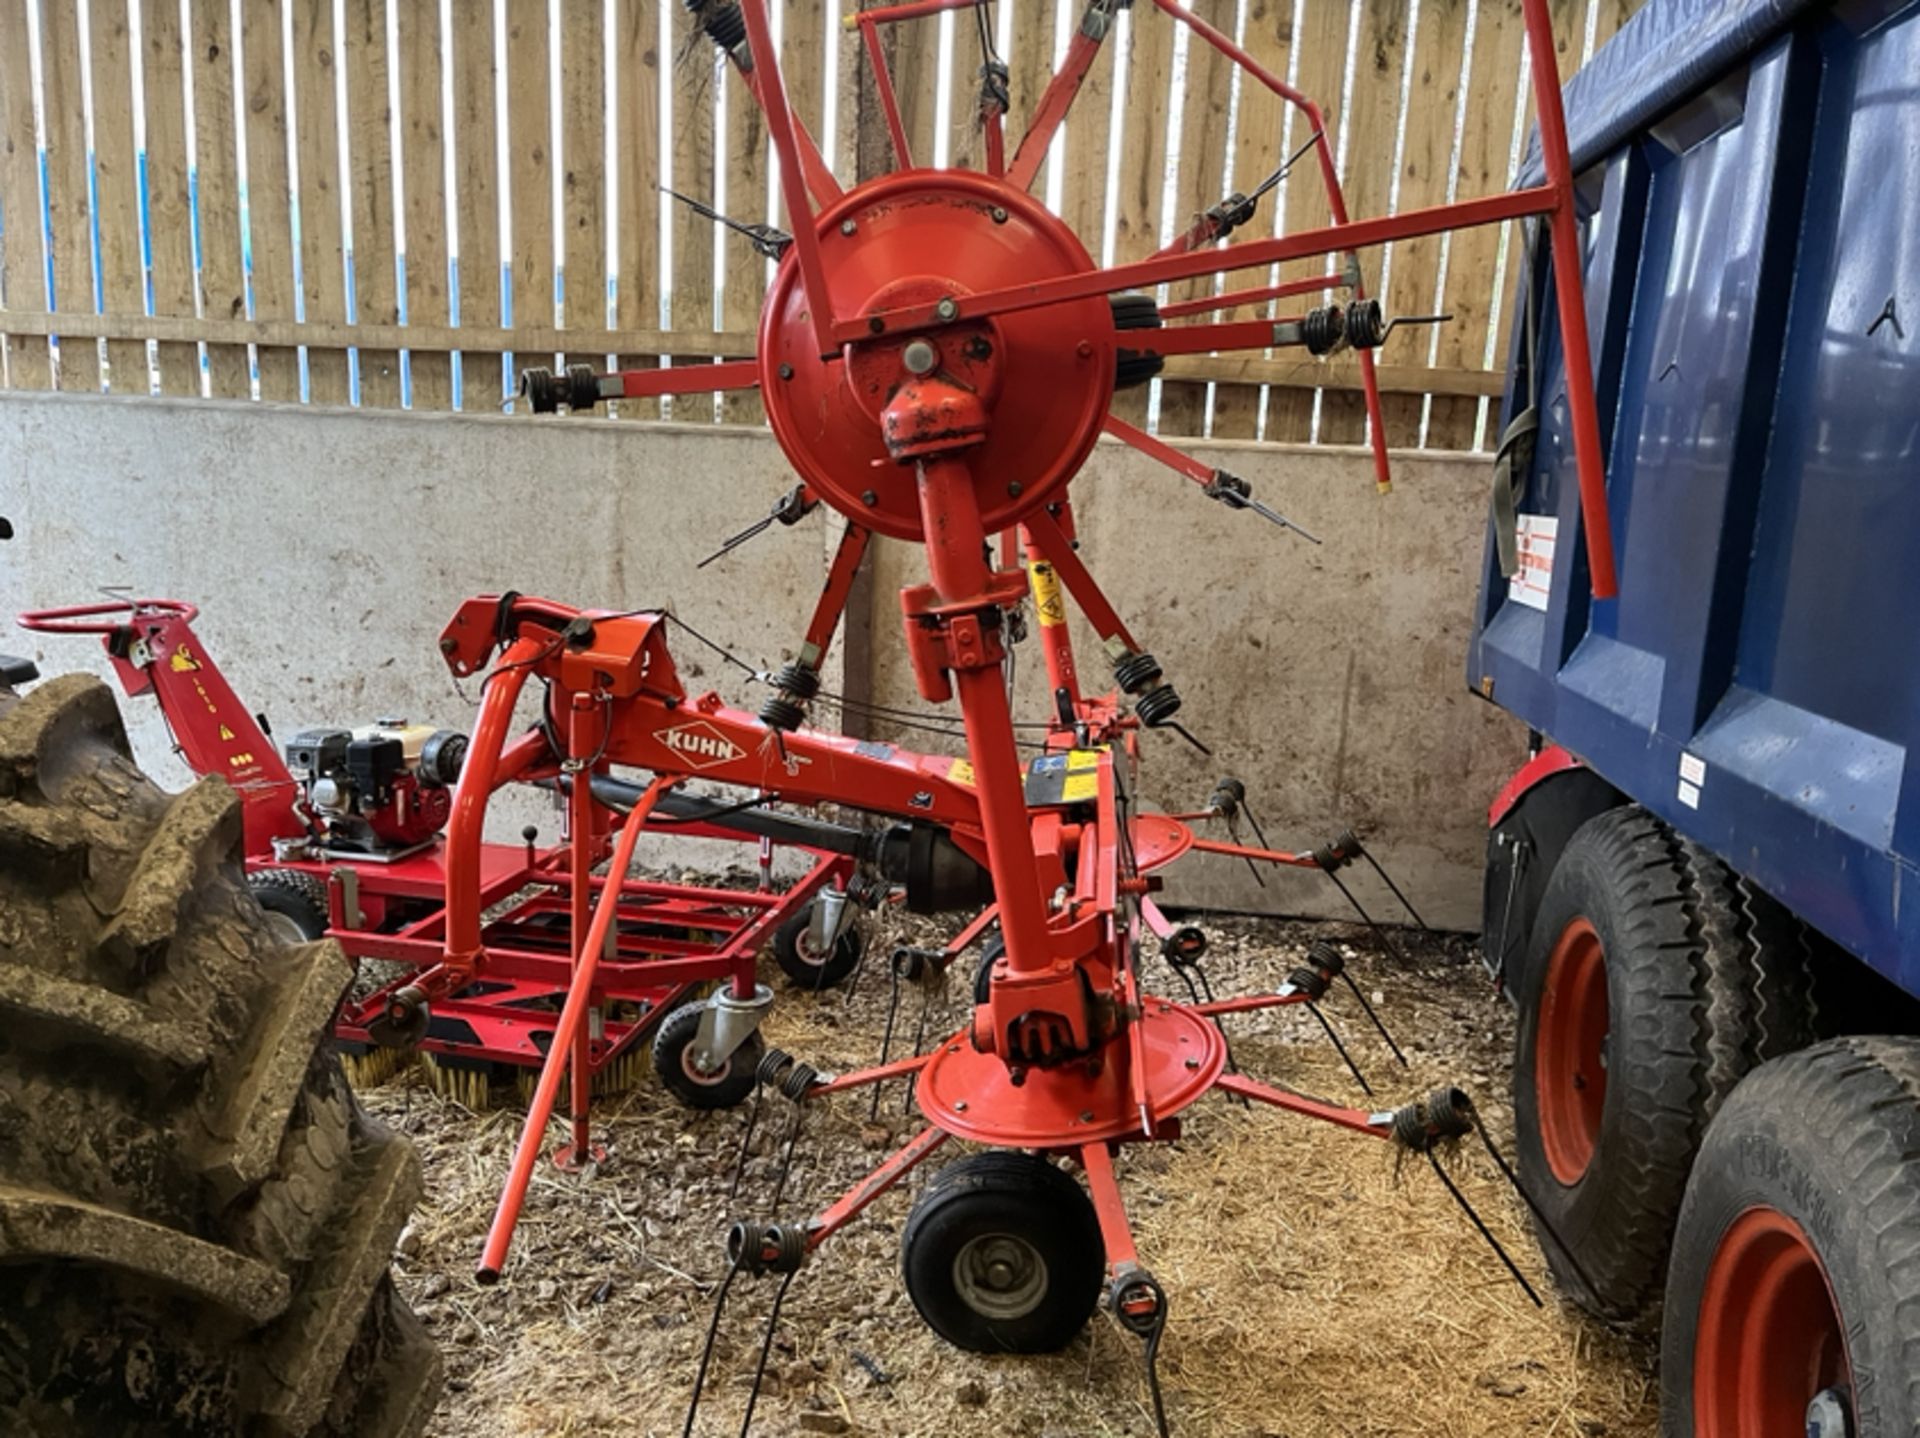 Kuhn gf502 4 rotor Tedder in excellent condition plus vat - Image 3 of 3